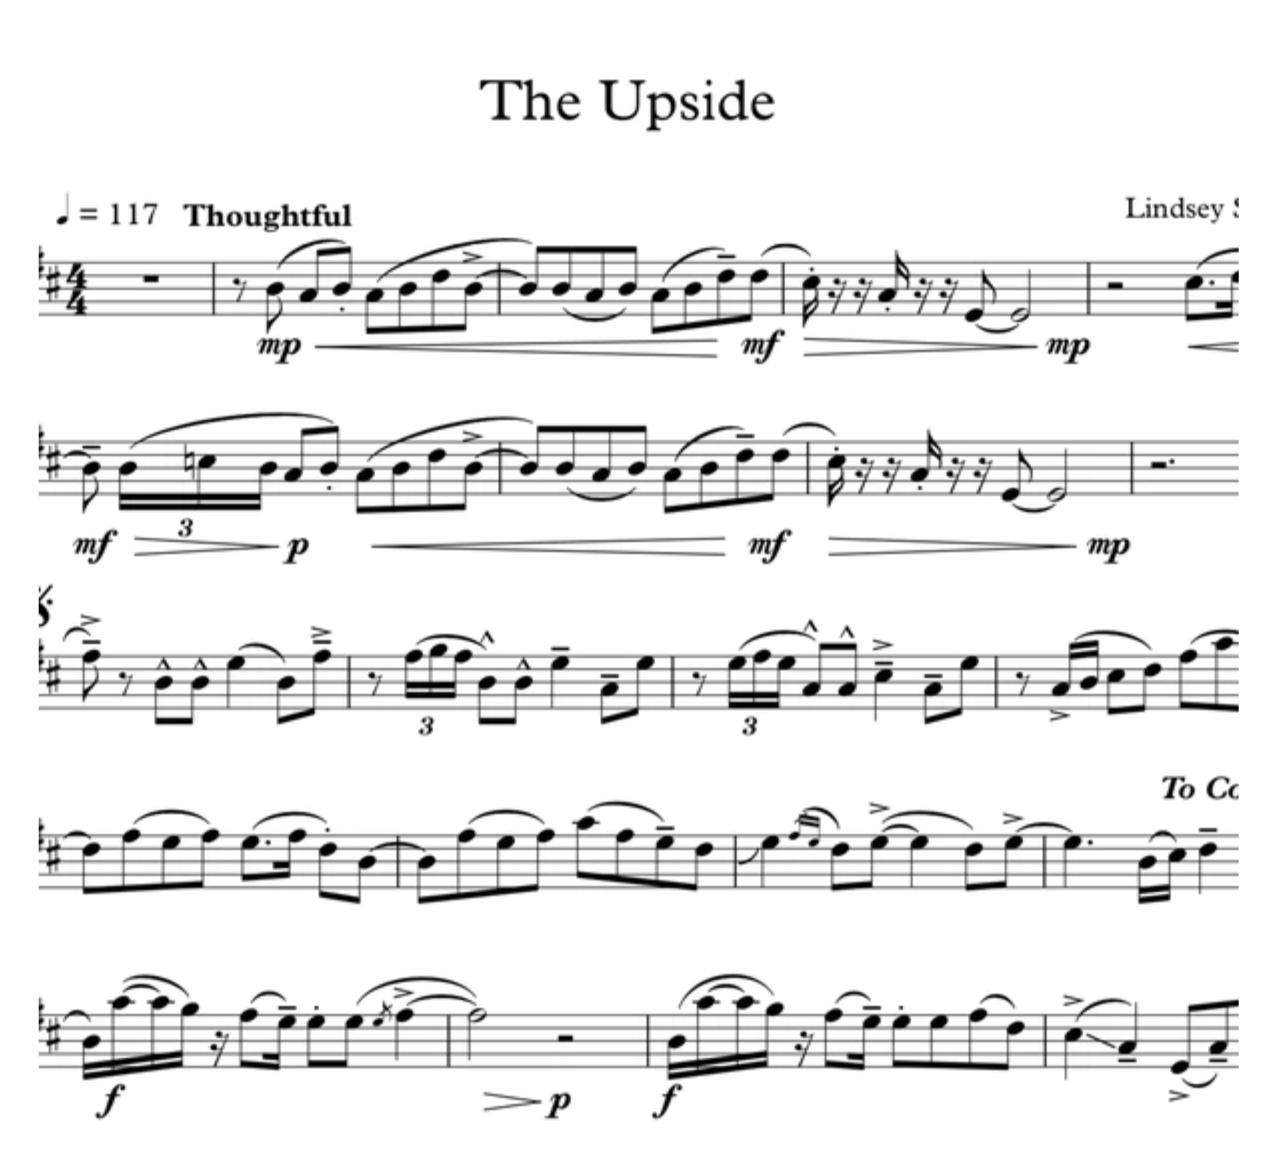 Lindsey Stirling Twitter: "#Artemis out and I've released some sheet music from the album! #Artemis #TheUpside #Underground and more on the way. Check it out! https://t.co/so1Z9MR4GL Solos also available for